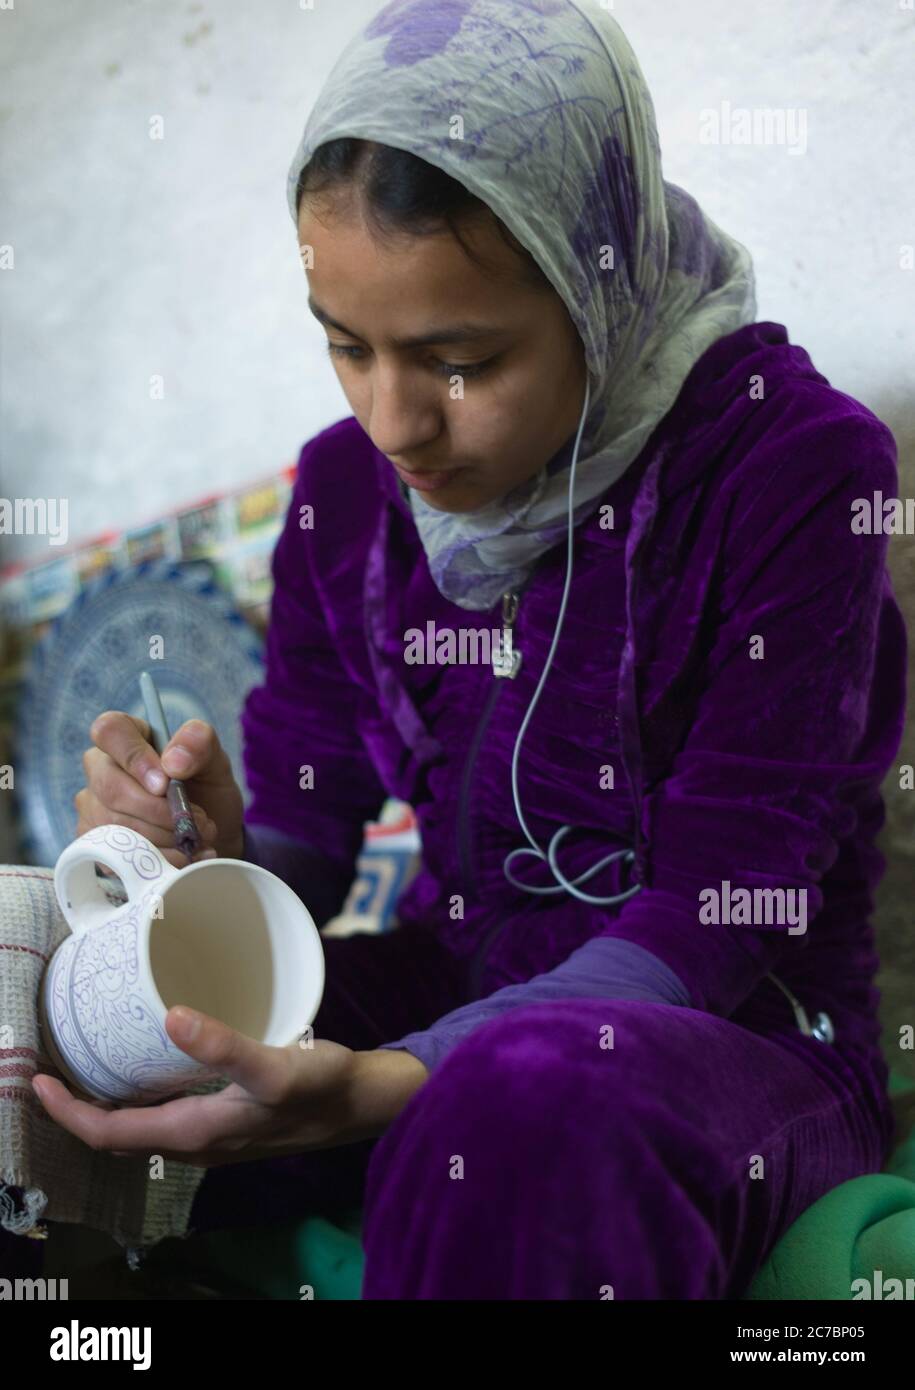 Moroccan girl with a headscarf paints a bowl in a pottery factory in Fes, Morocco. Stock Photo